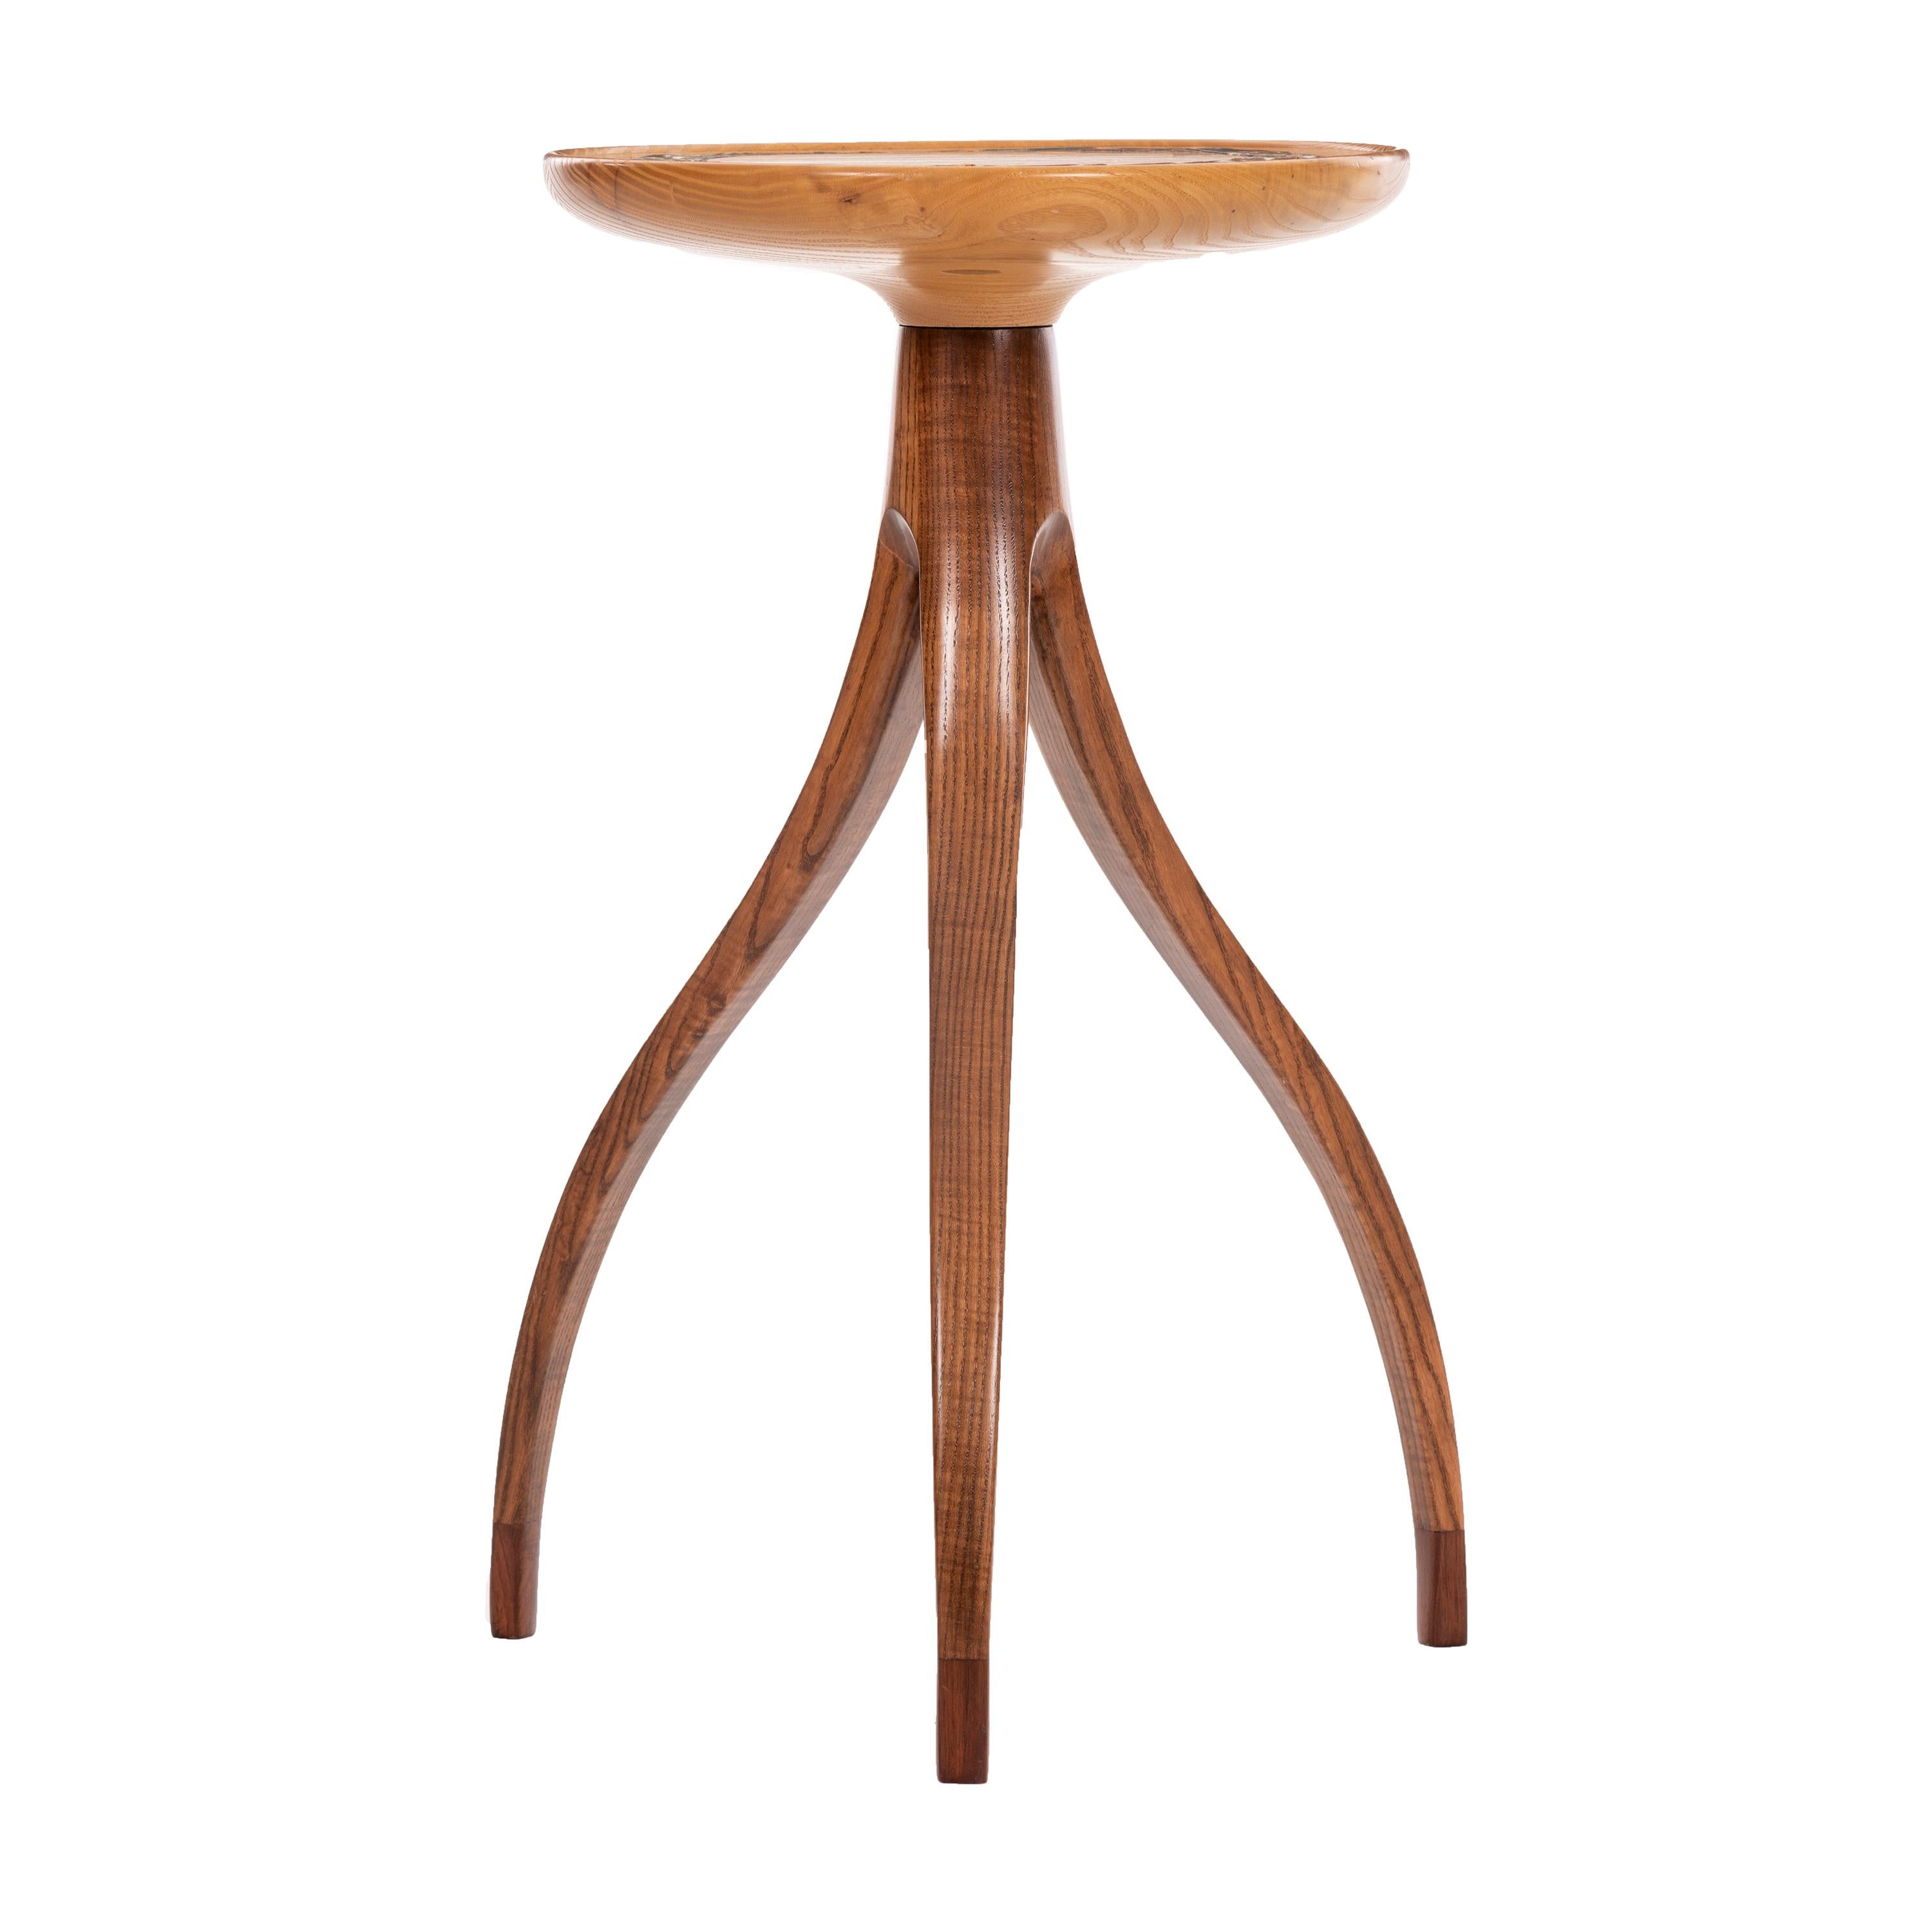 Tripod Plant Pedestal Table in the Style of Edward Wormley